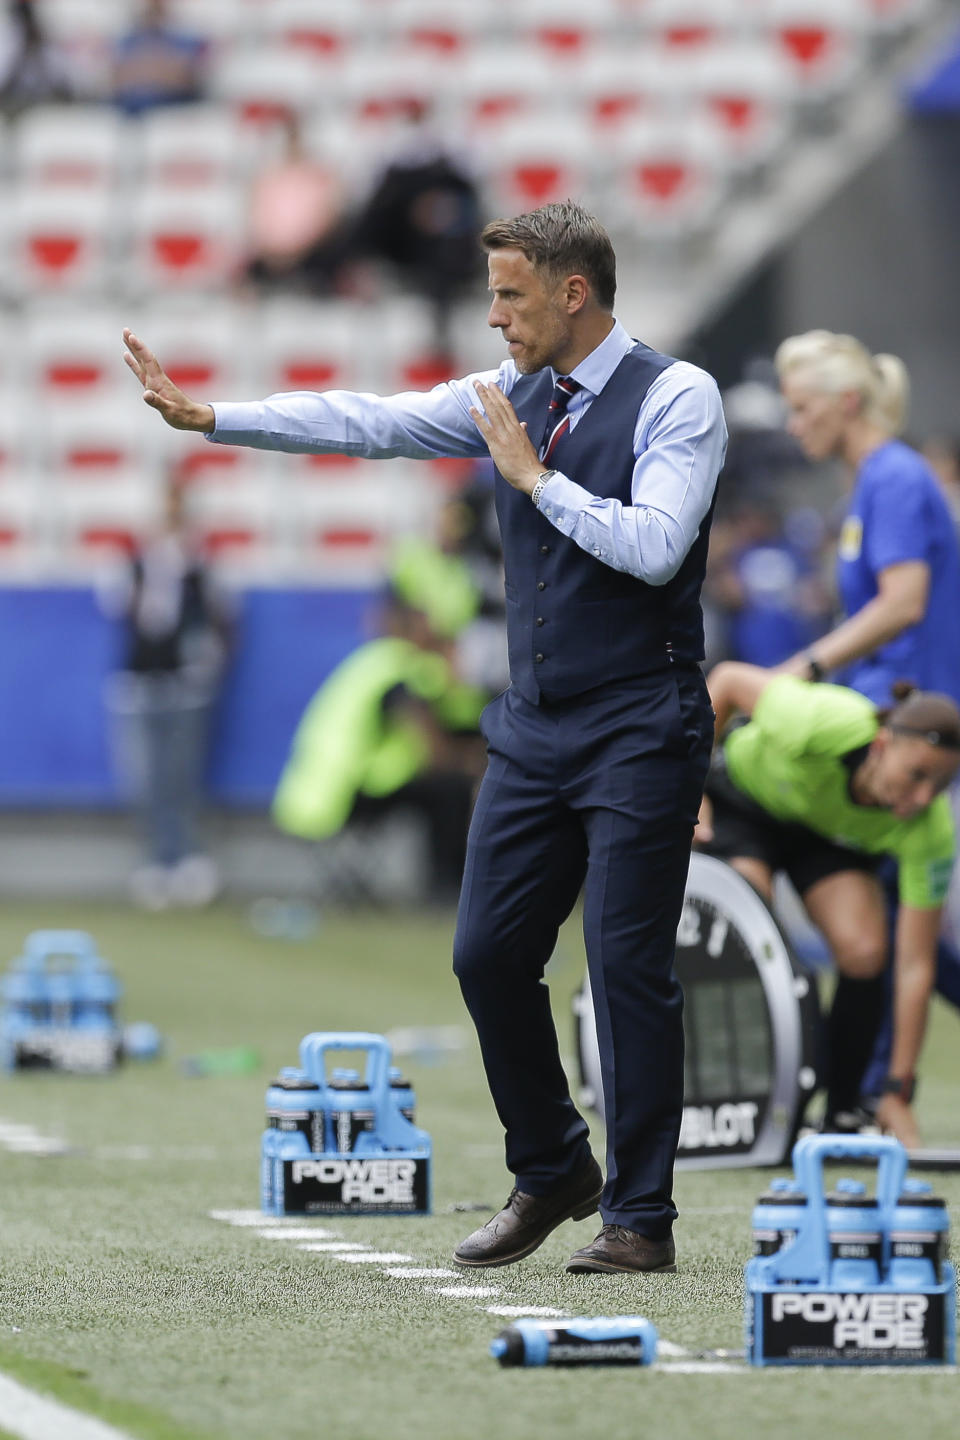 England head coach Philip Neville gives direction to the players during the Women's World Cup Group D soccer match between England and Scotland in Nice, France, Sunday, June 9, 2019. (AP Photo/Claude Paris)